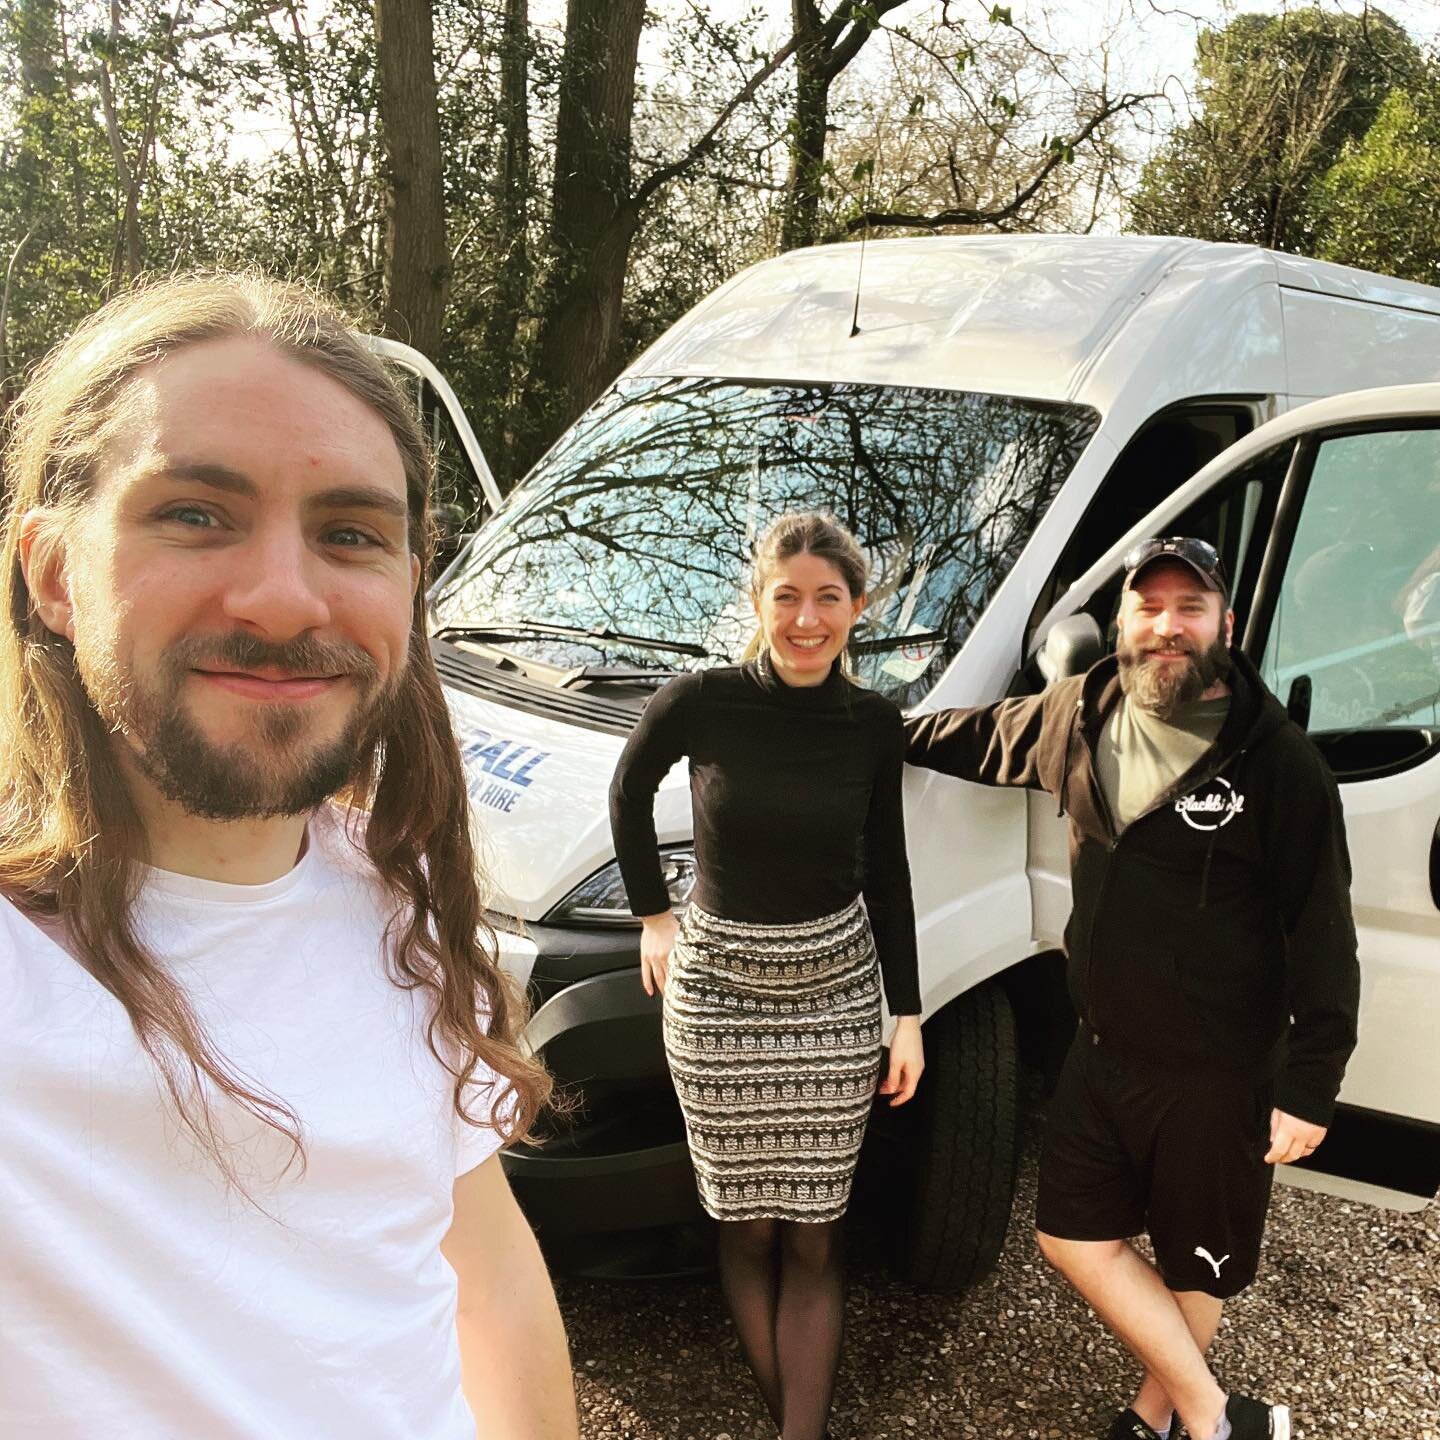 Van life! 🚐 @kendallcars50 always look after us with van rentals on gig days. Having a van is so much easier than taking multiple cars full of gear! Shout out to our drummer @den_sewell, Tetris master, who always manages to fit everything in 👏
&bul